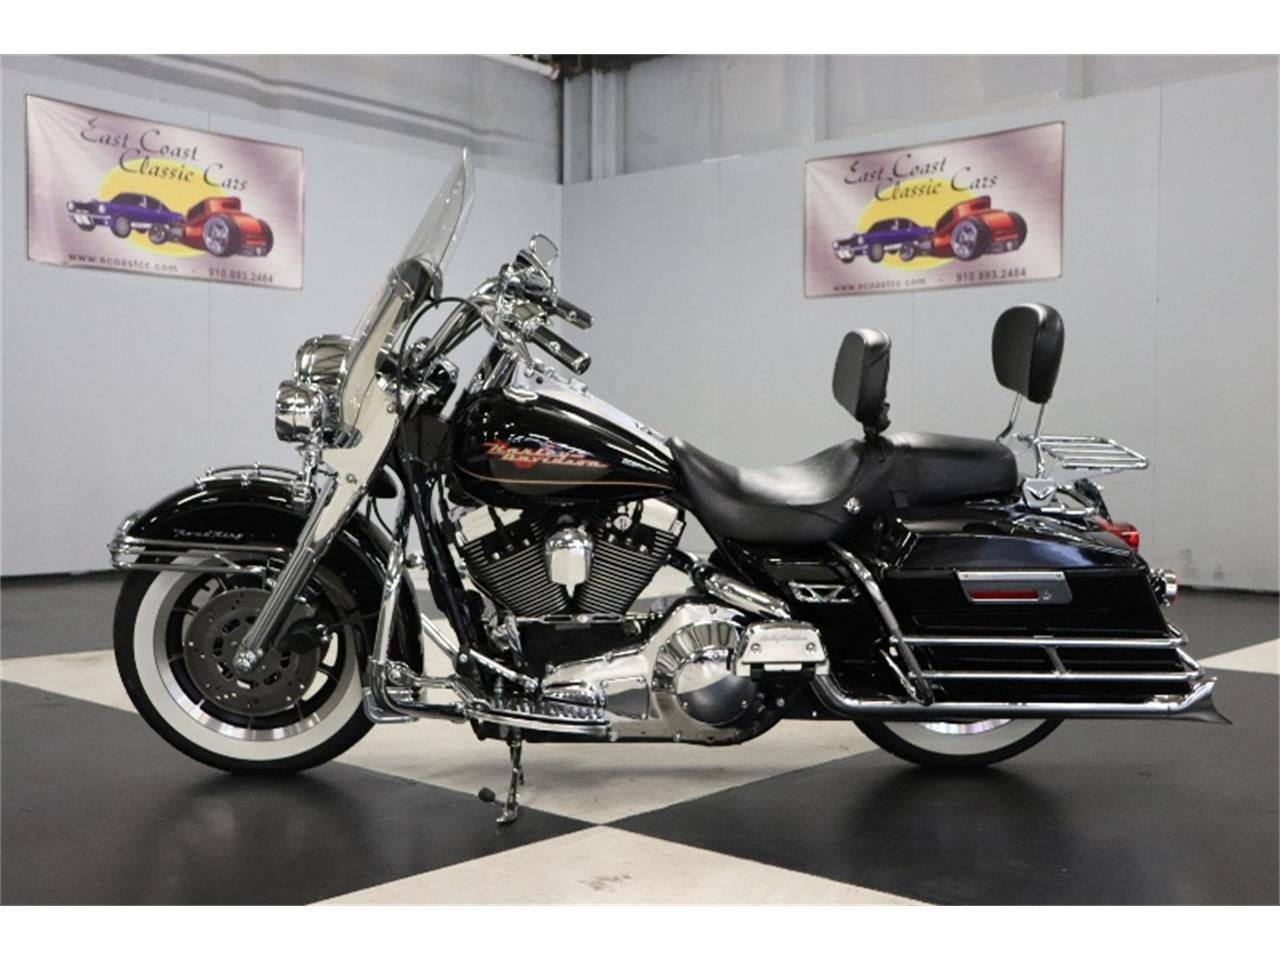 1997 Harley-Davidson Motorcycle for sale in Lillington, NC